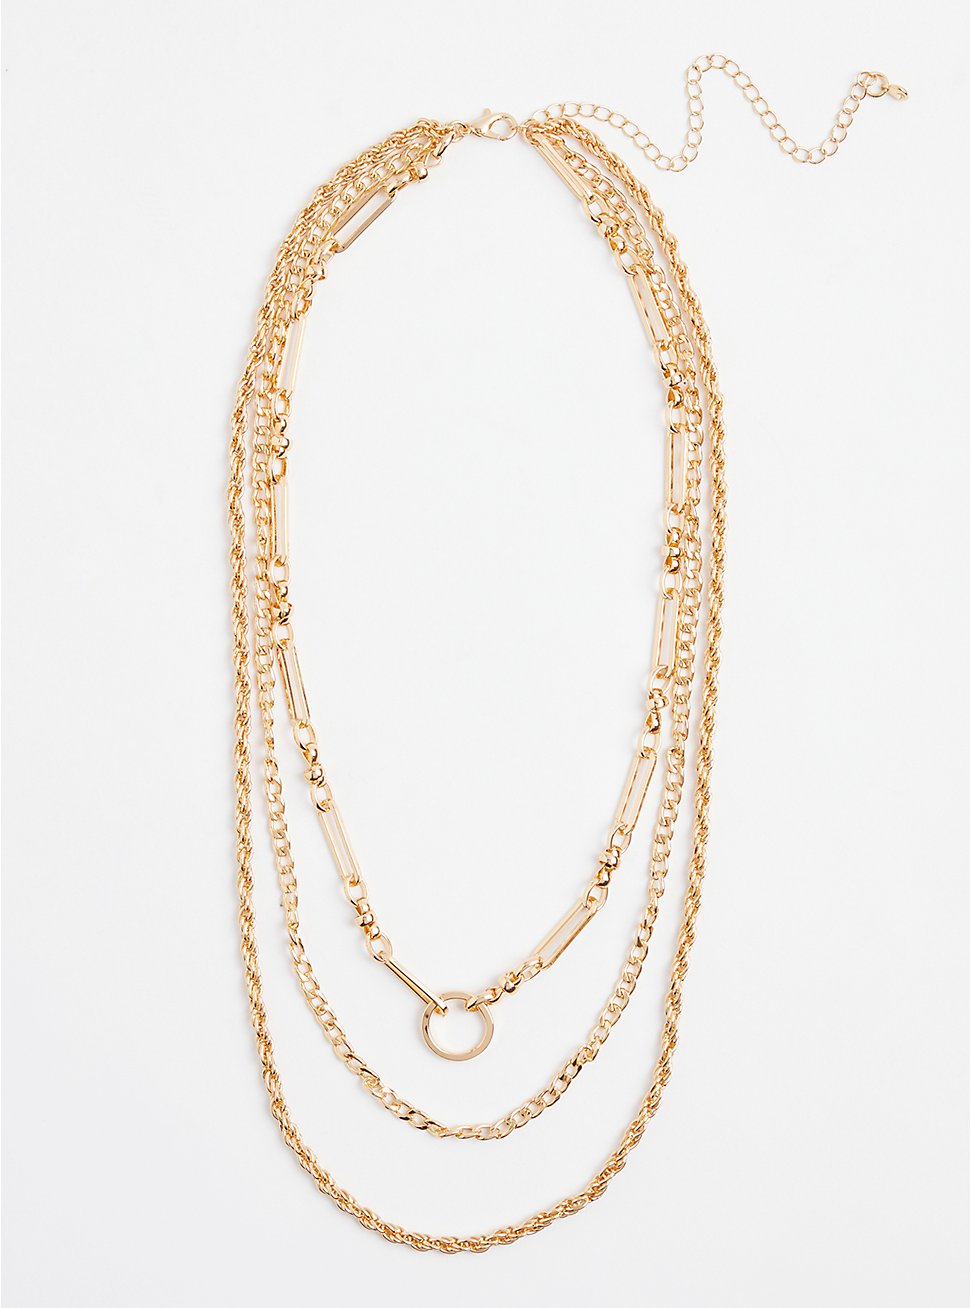 Link & Rope Chain Layered Necklace - Gold Tone, , hi-res